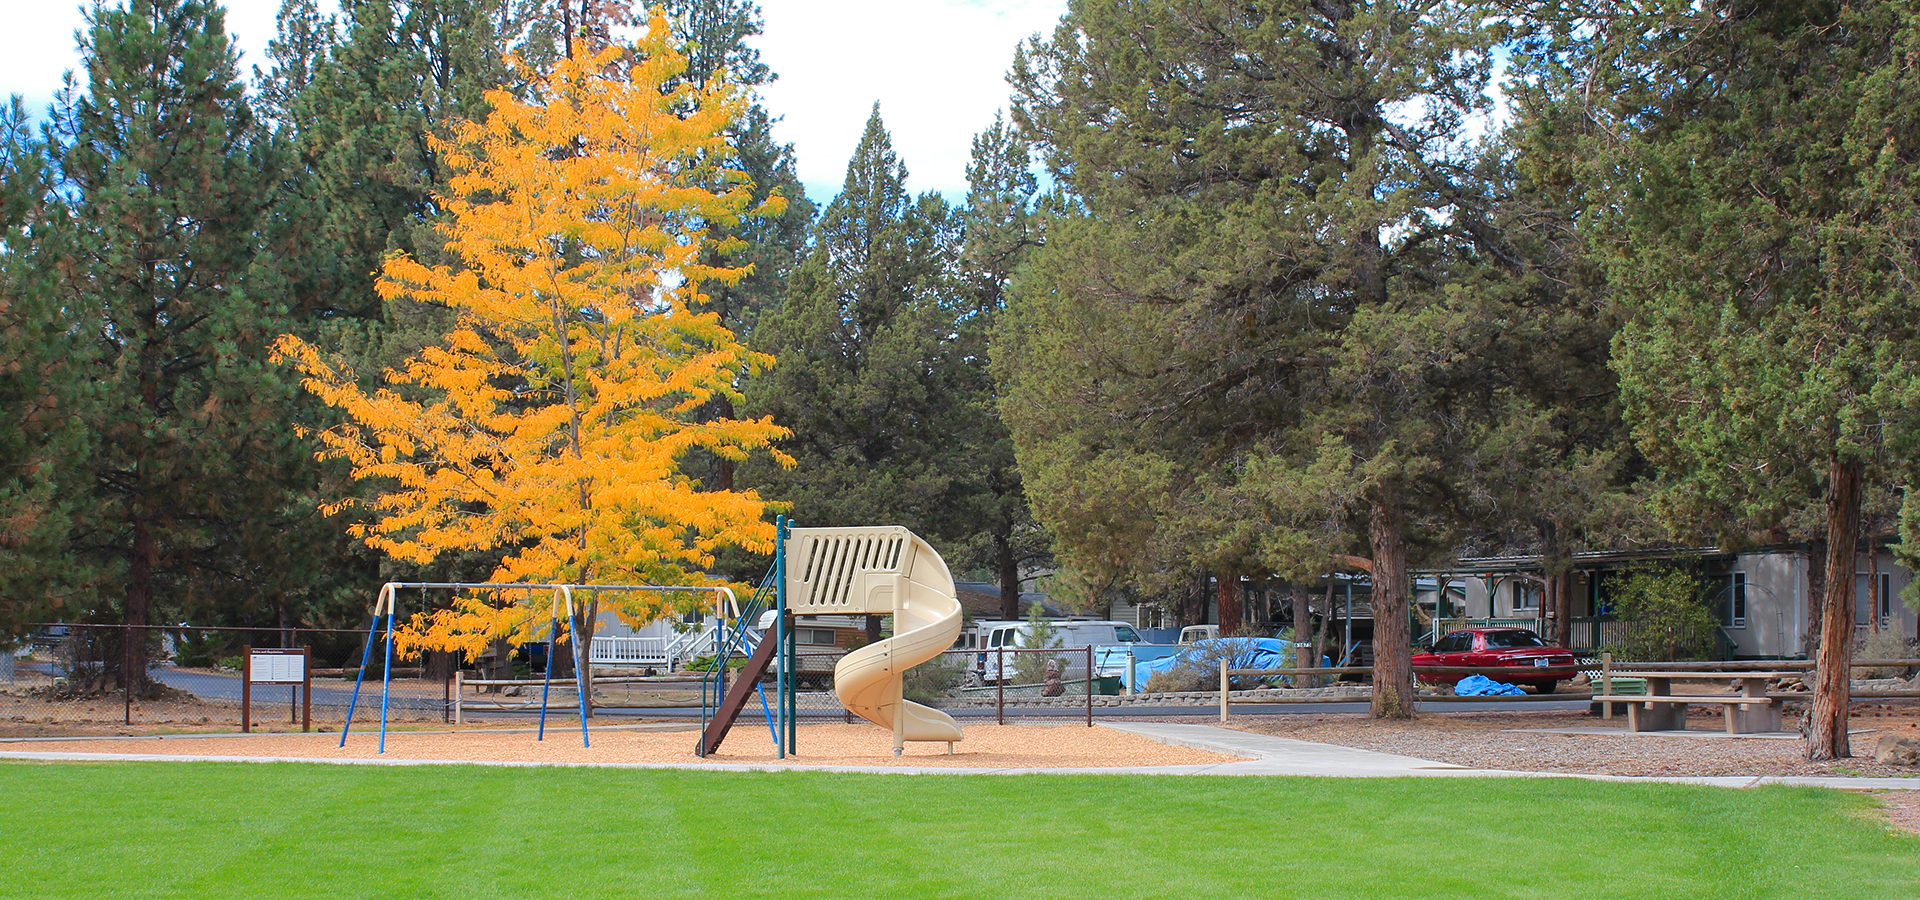 The playground at woodriver park in the fall.